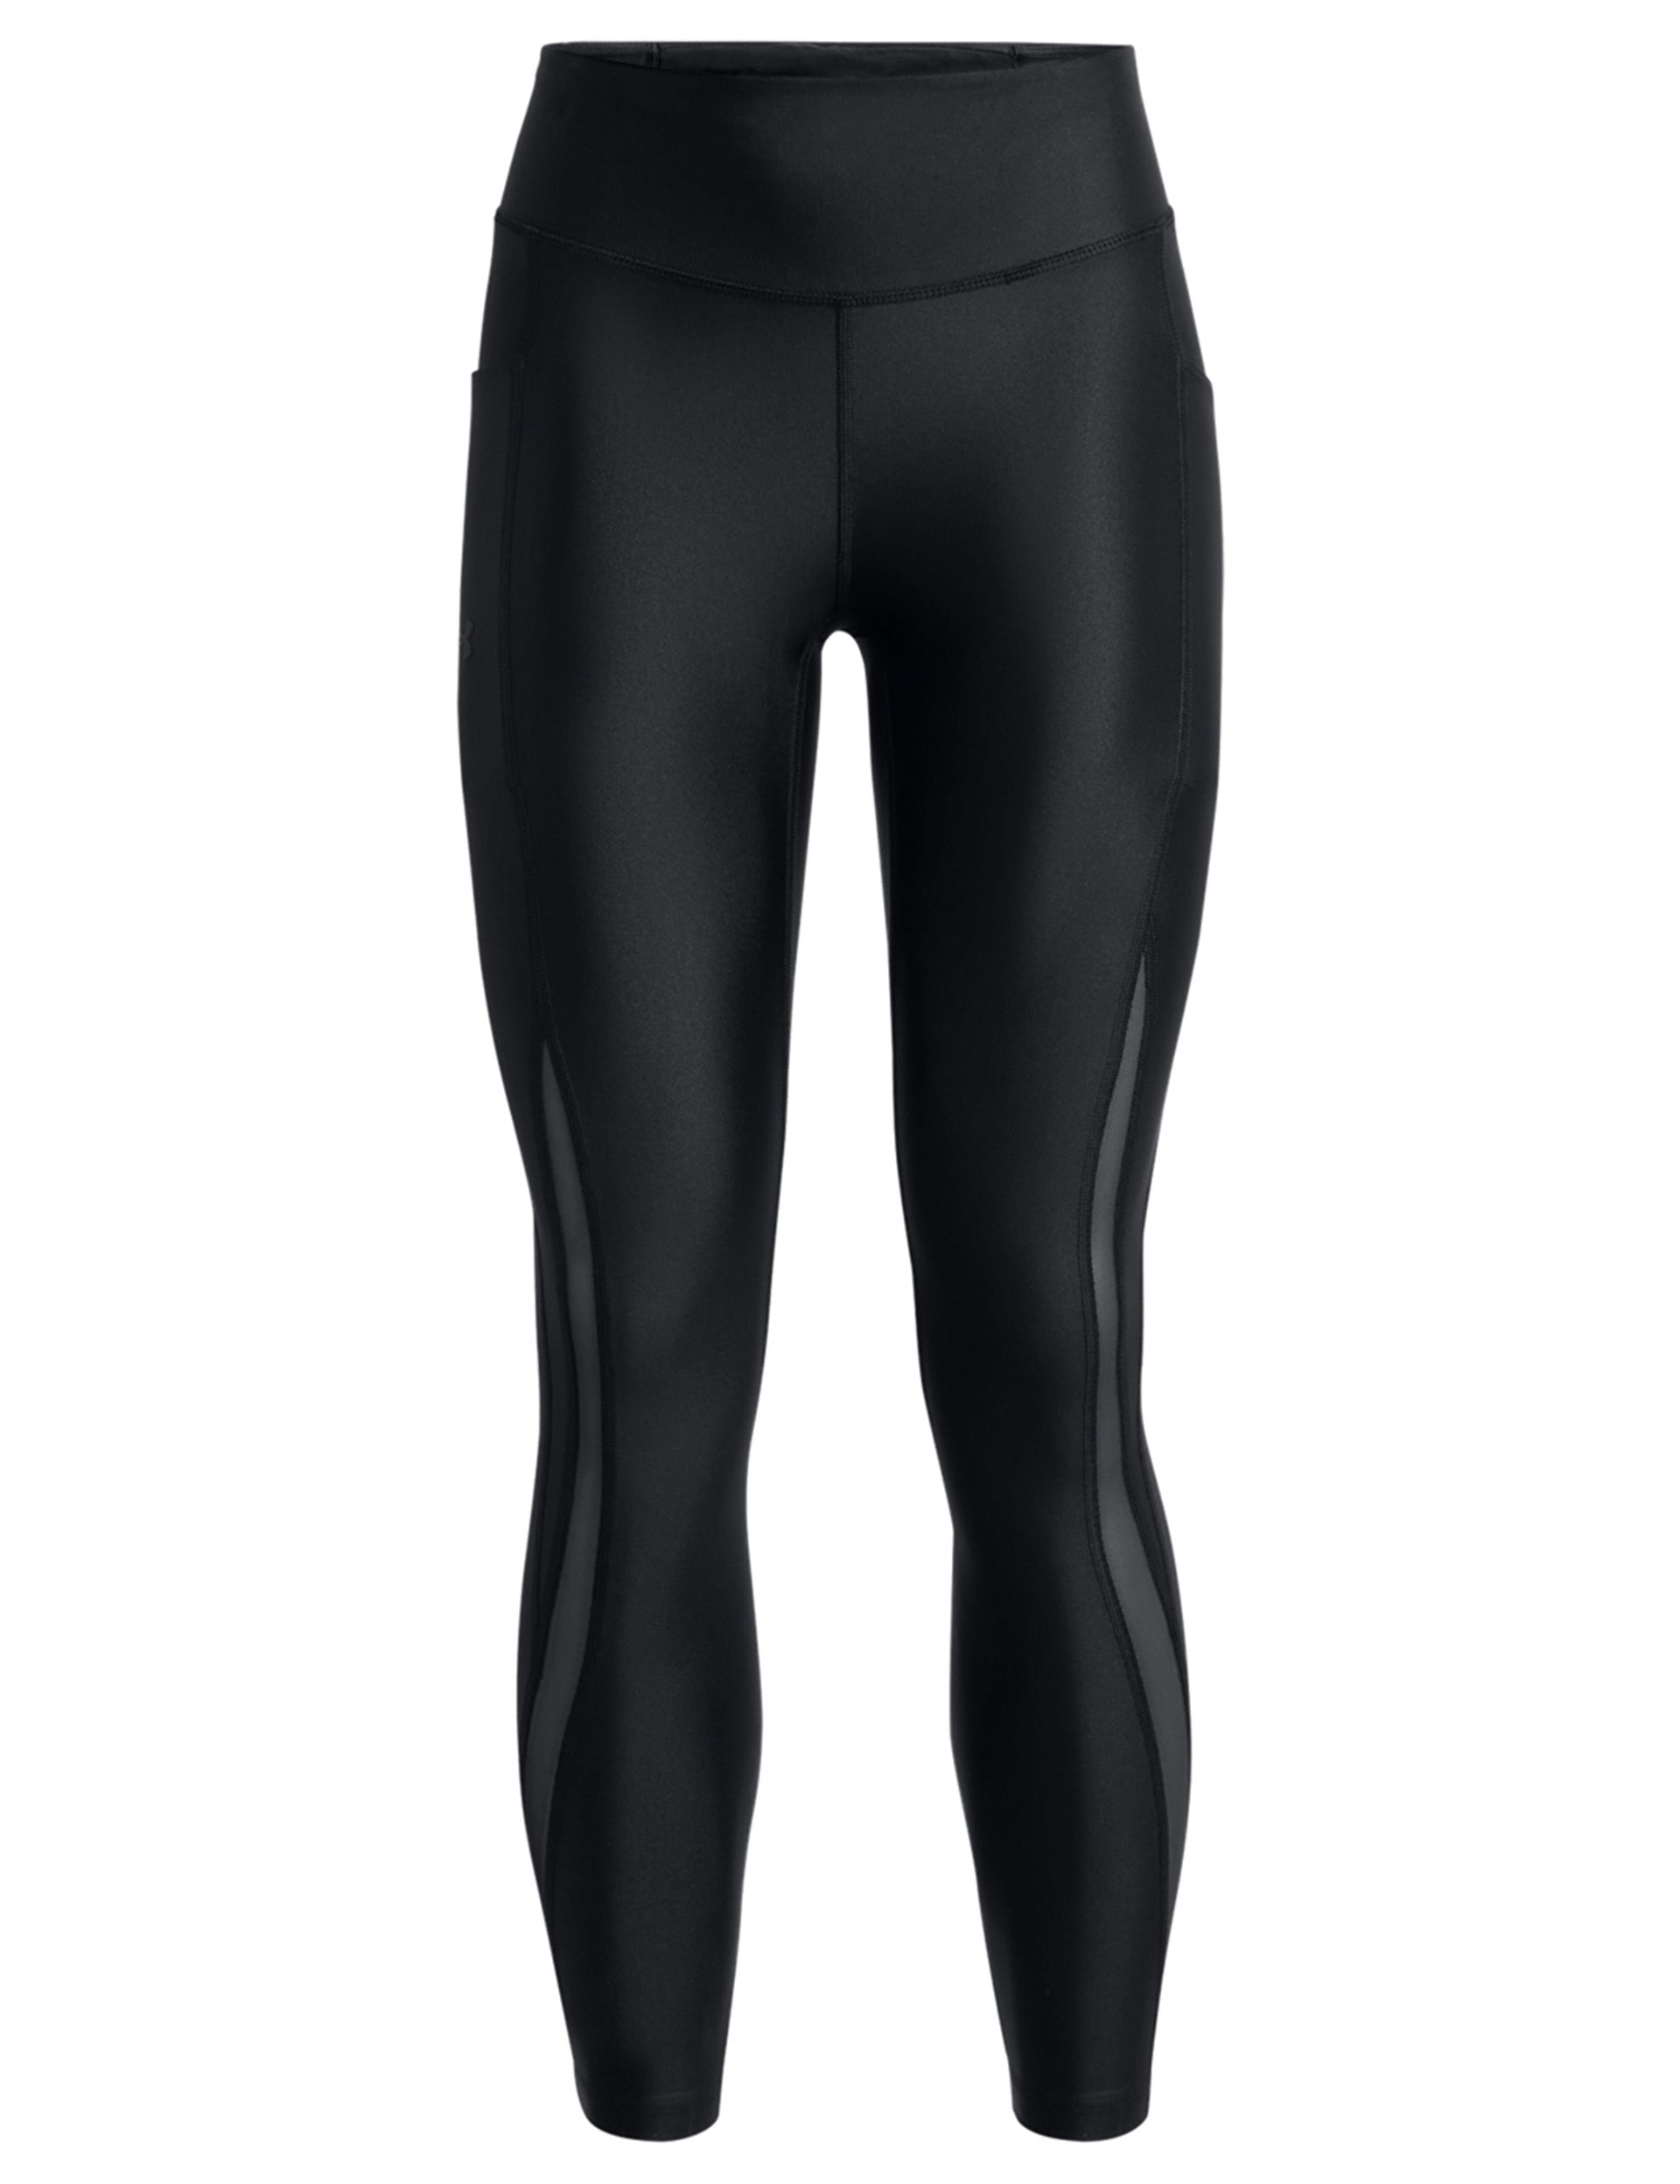 Under Armour FlyFast Iso-Chill Tights - Black/Reflective